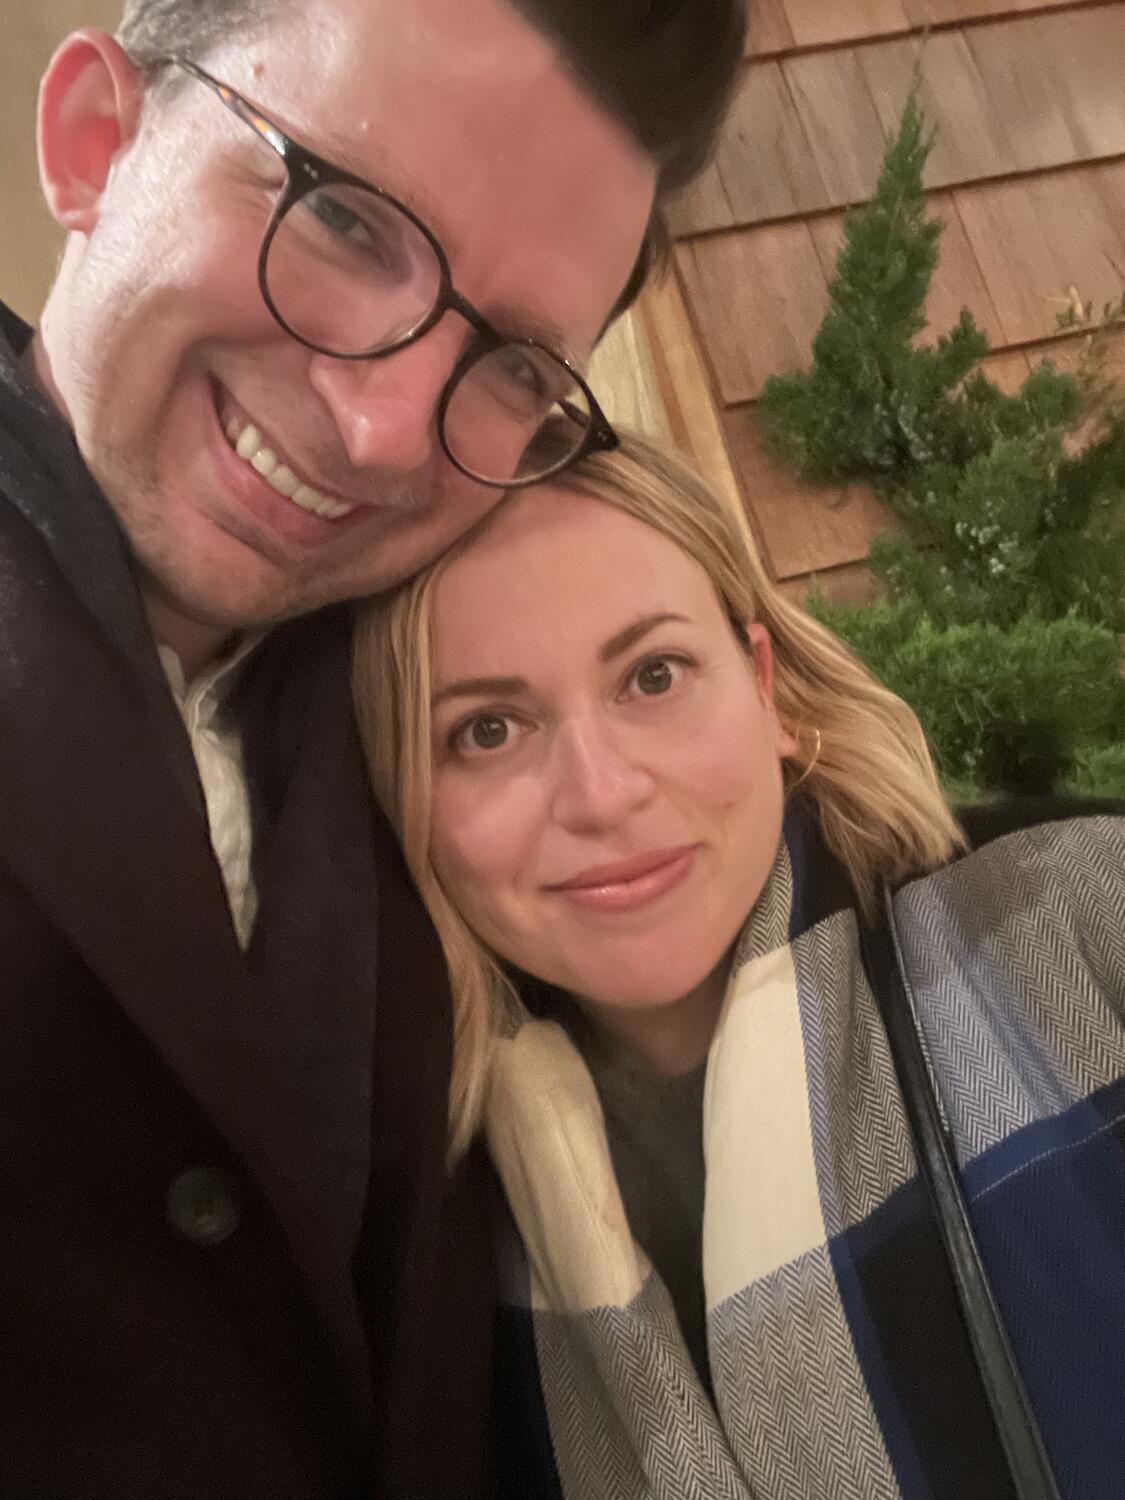 A selfie with Amy, we're outside in big coats and looking chilly but very happy